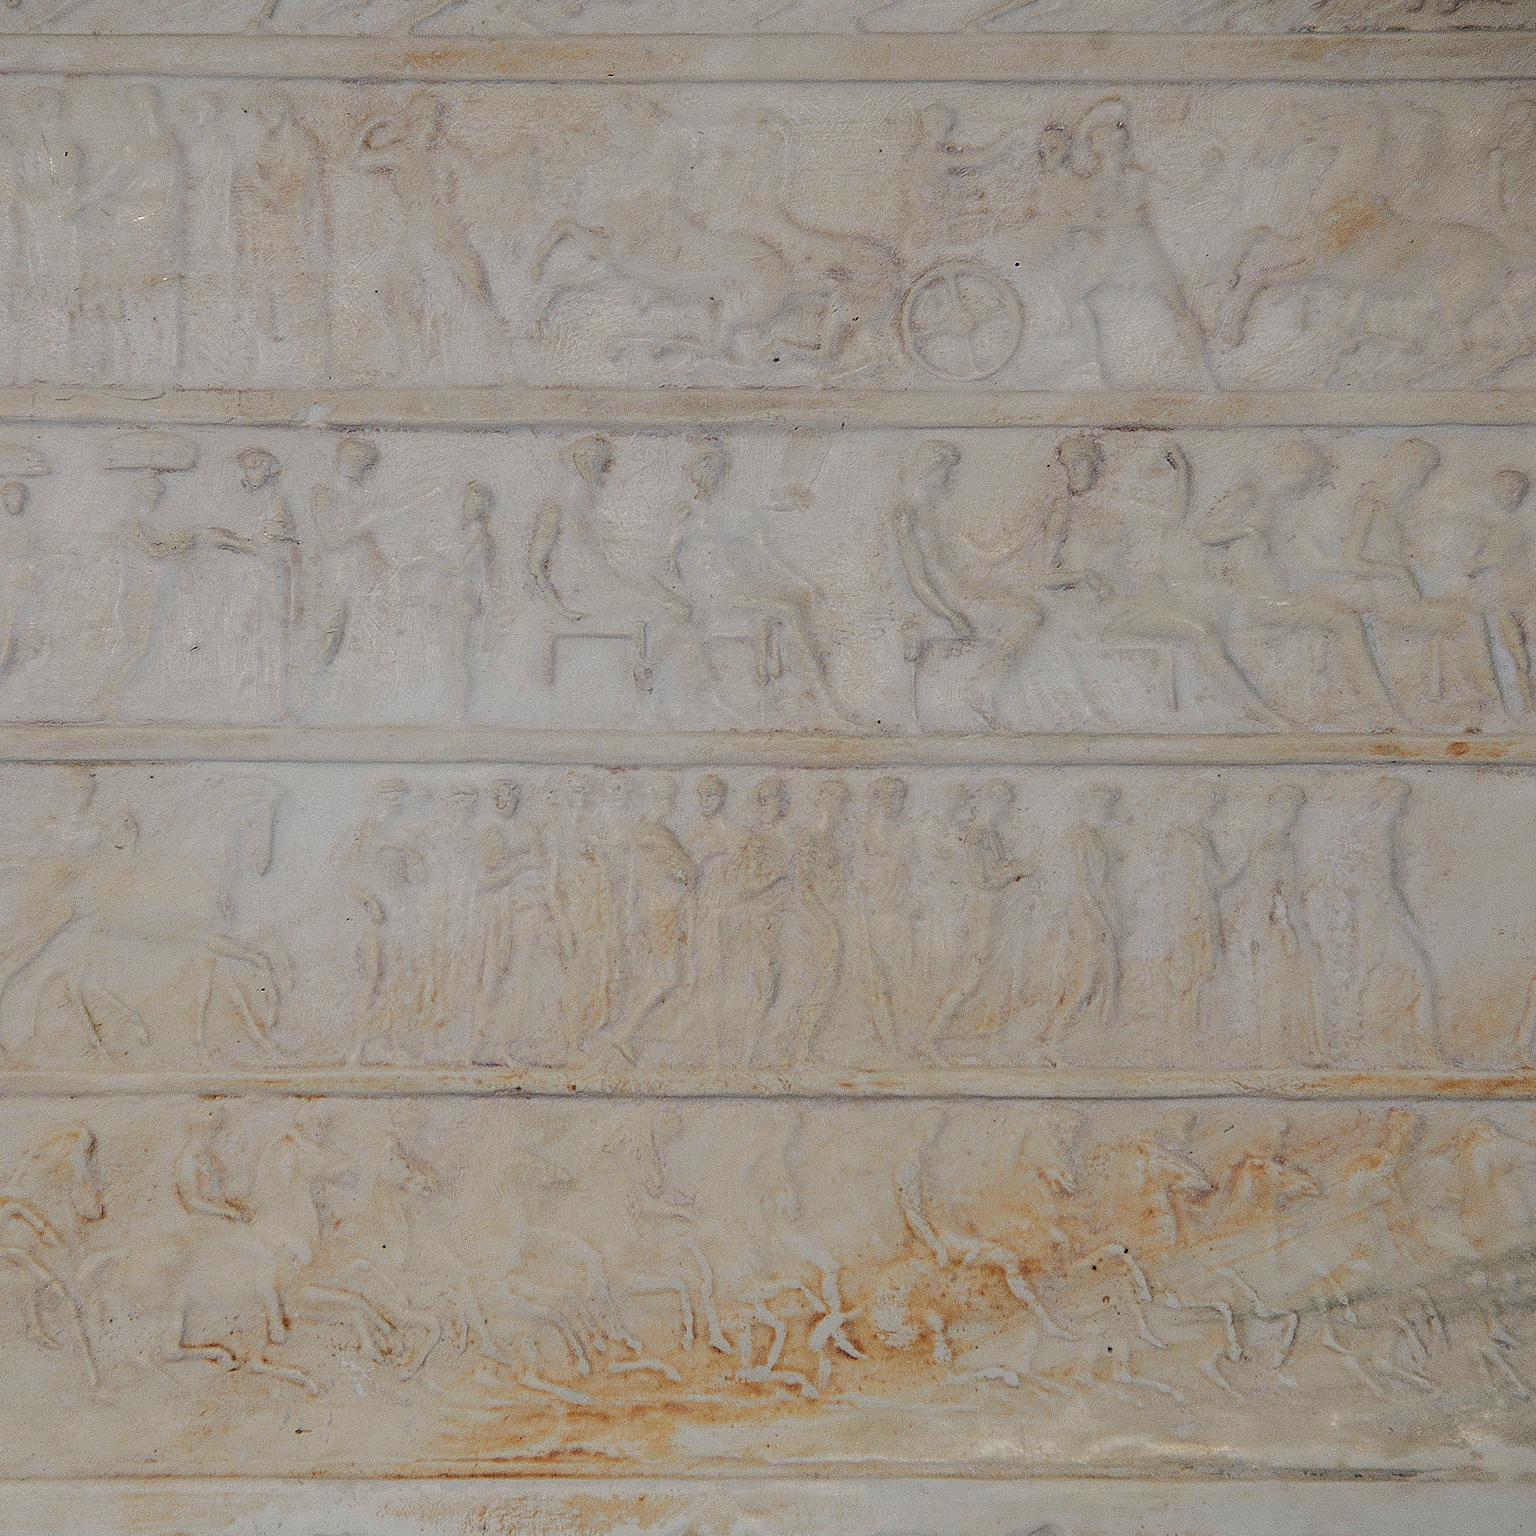 This is a beautiful, decorative and large late 19th century plaster panel museum copy of the parthenon friezes after henning, circa 1880.